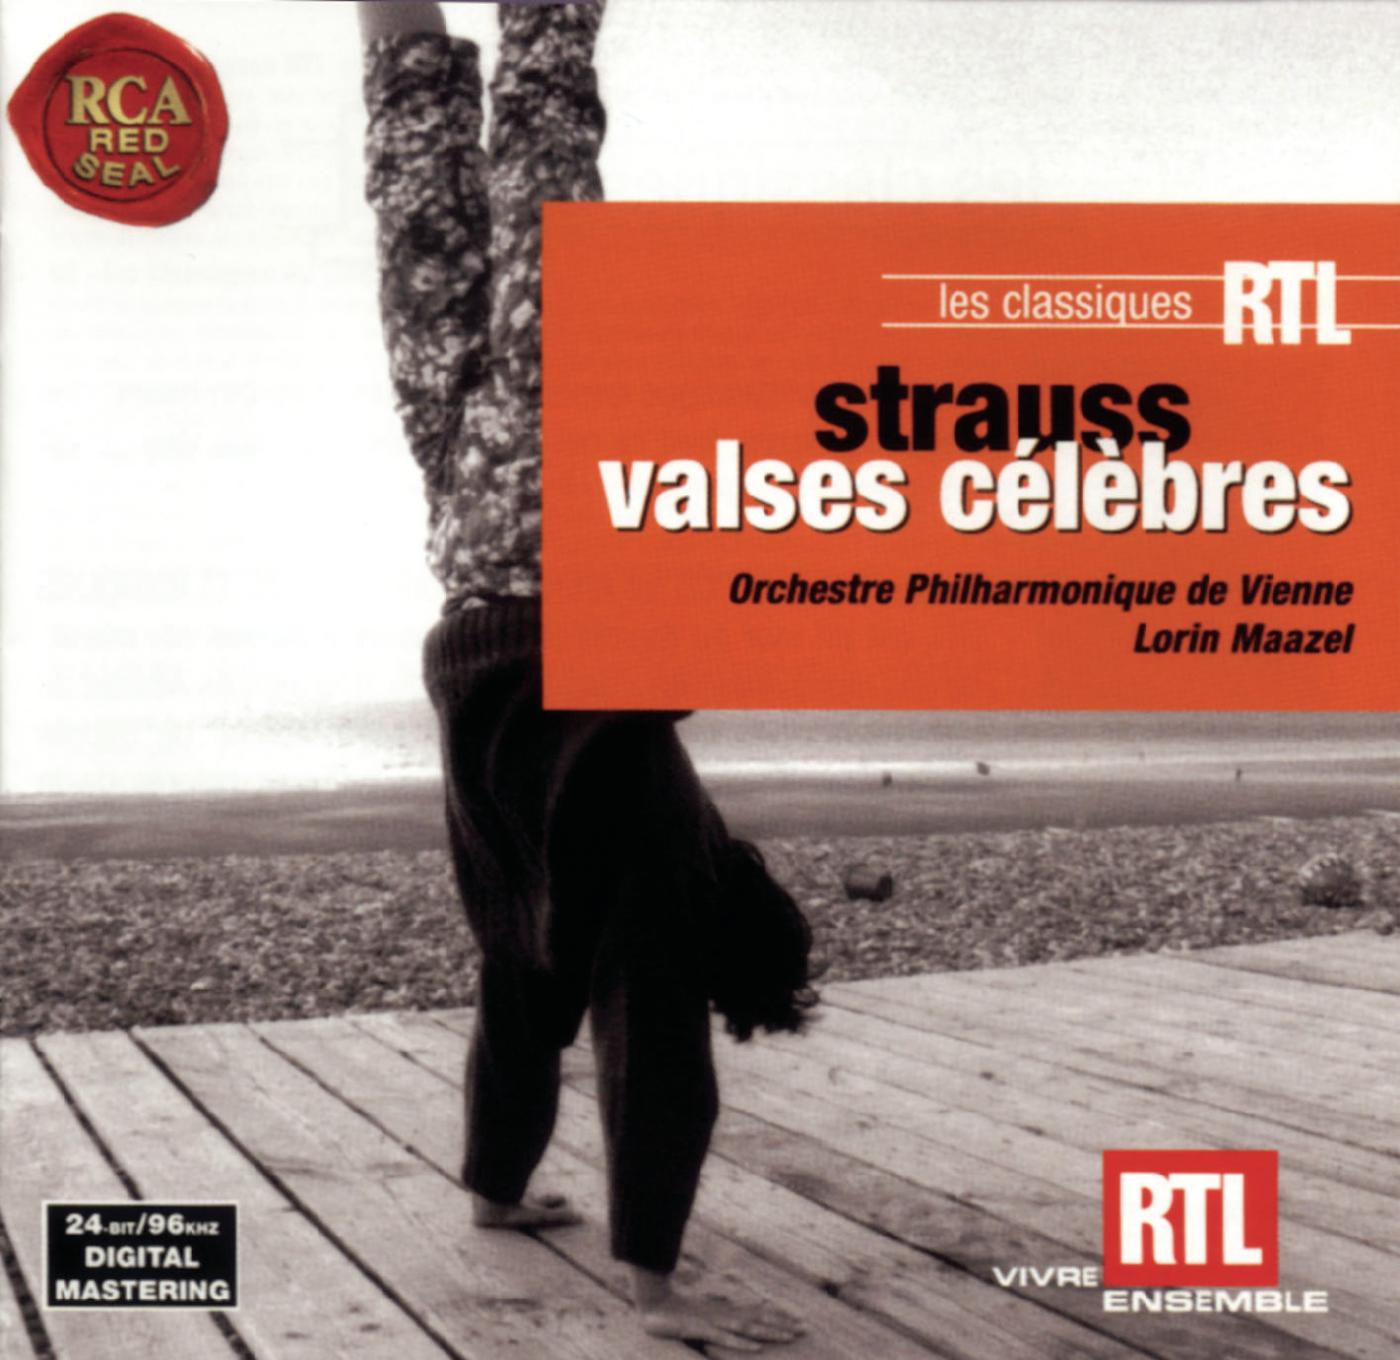 Strauss: Valses Ce le bres